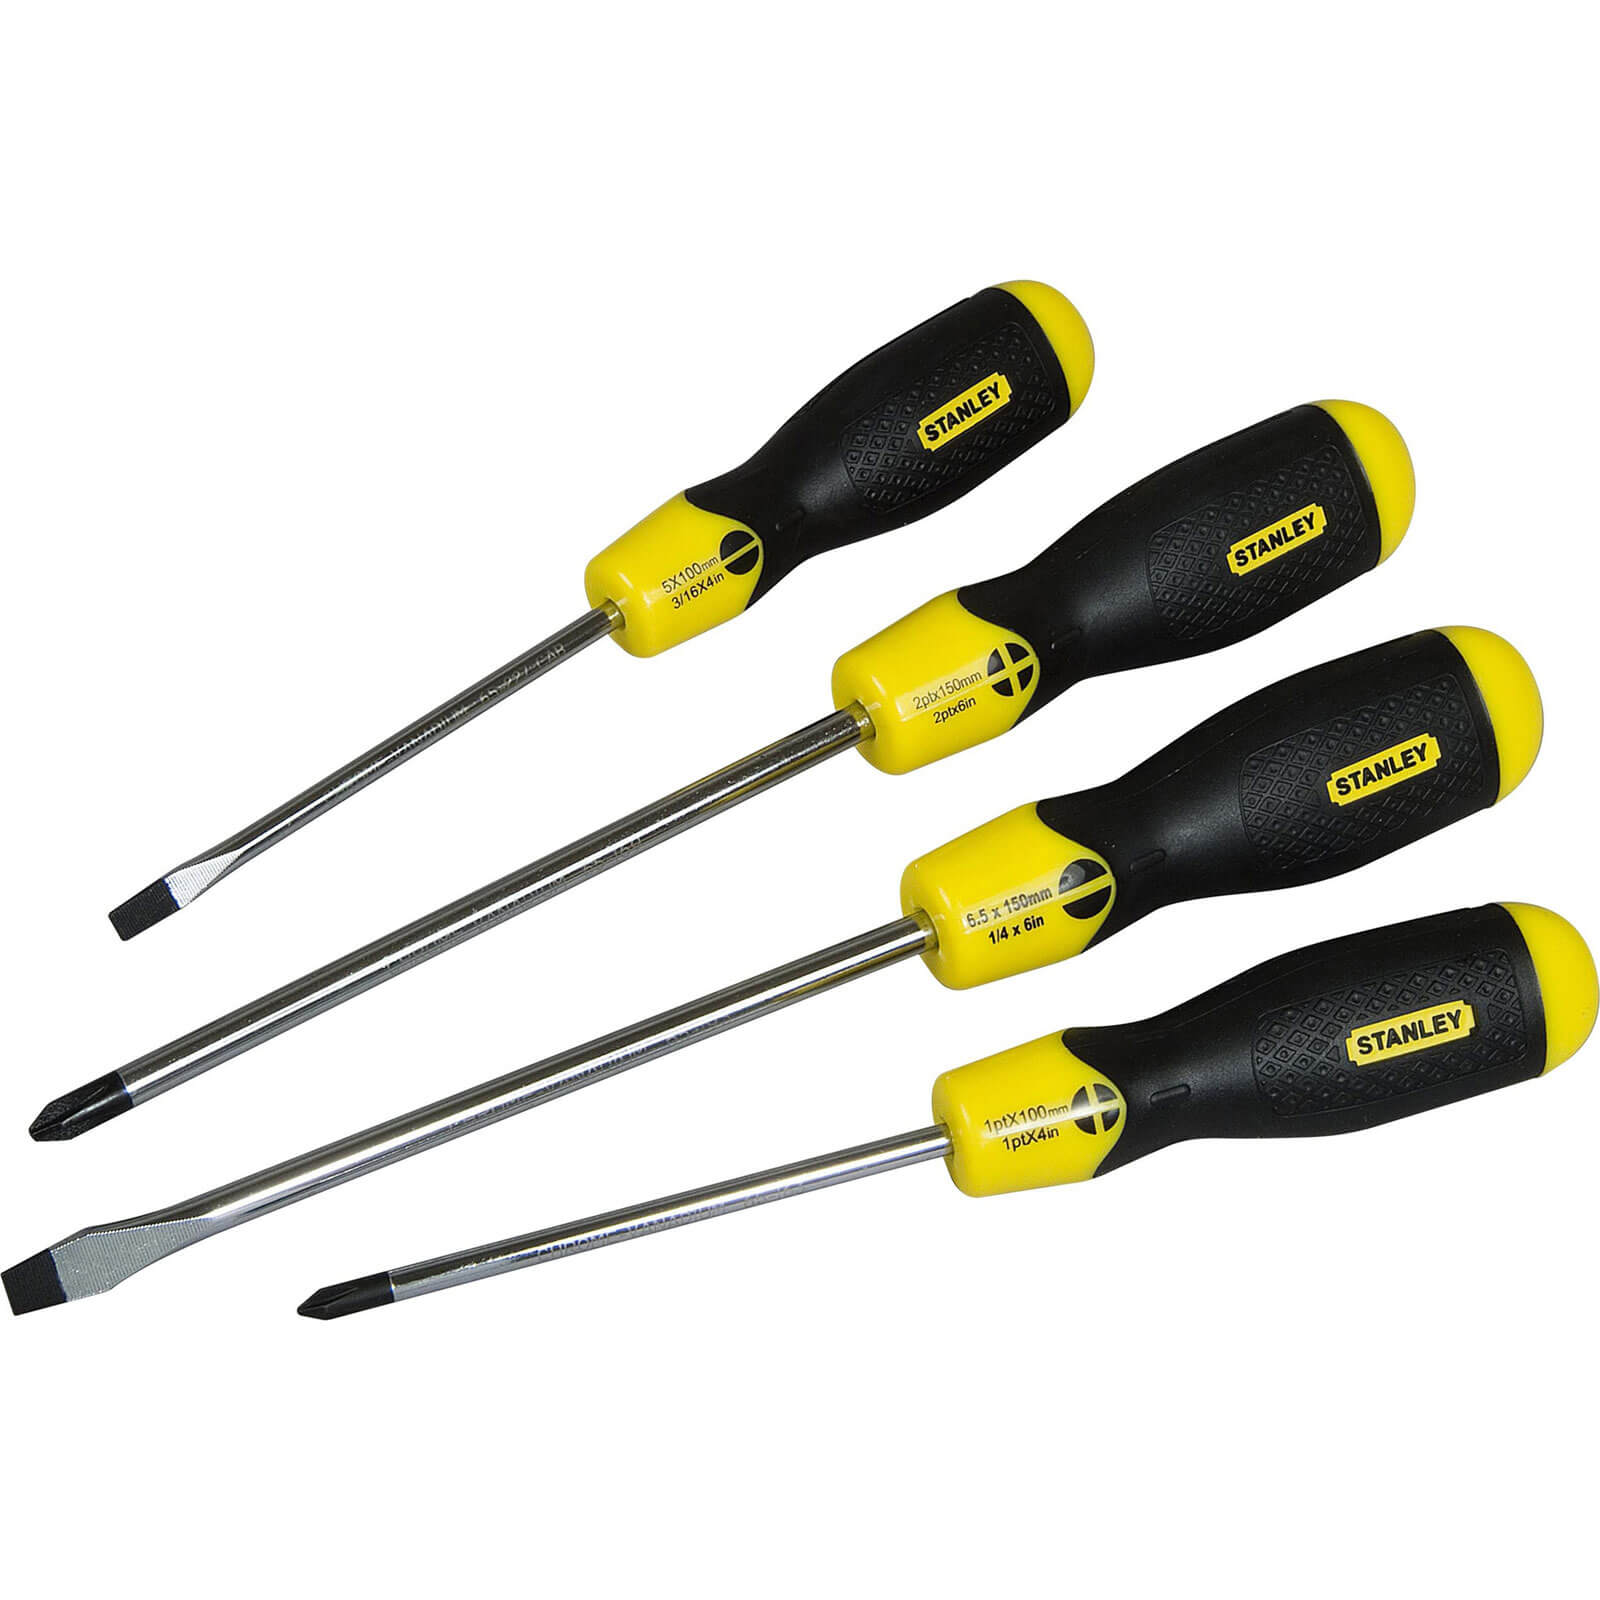 Image of Stanley 4 Piece Cushion Grip Phillips and Slotted Screwdriver Set